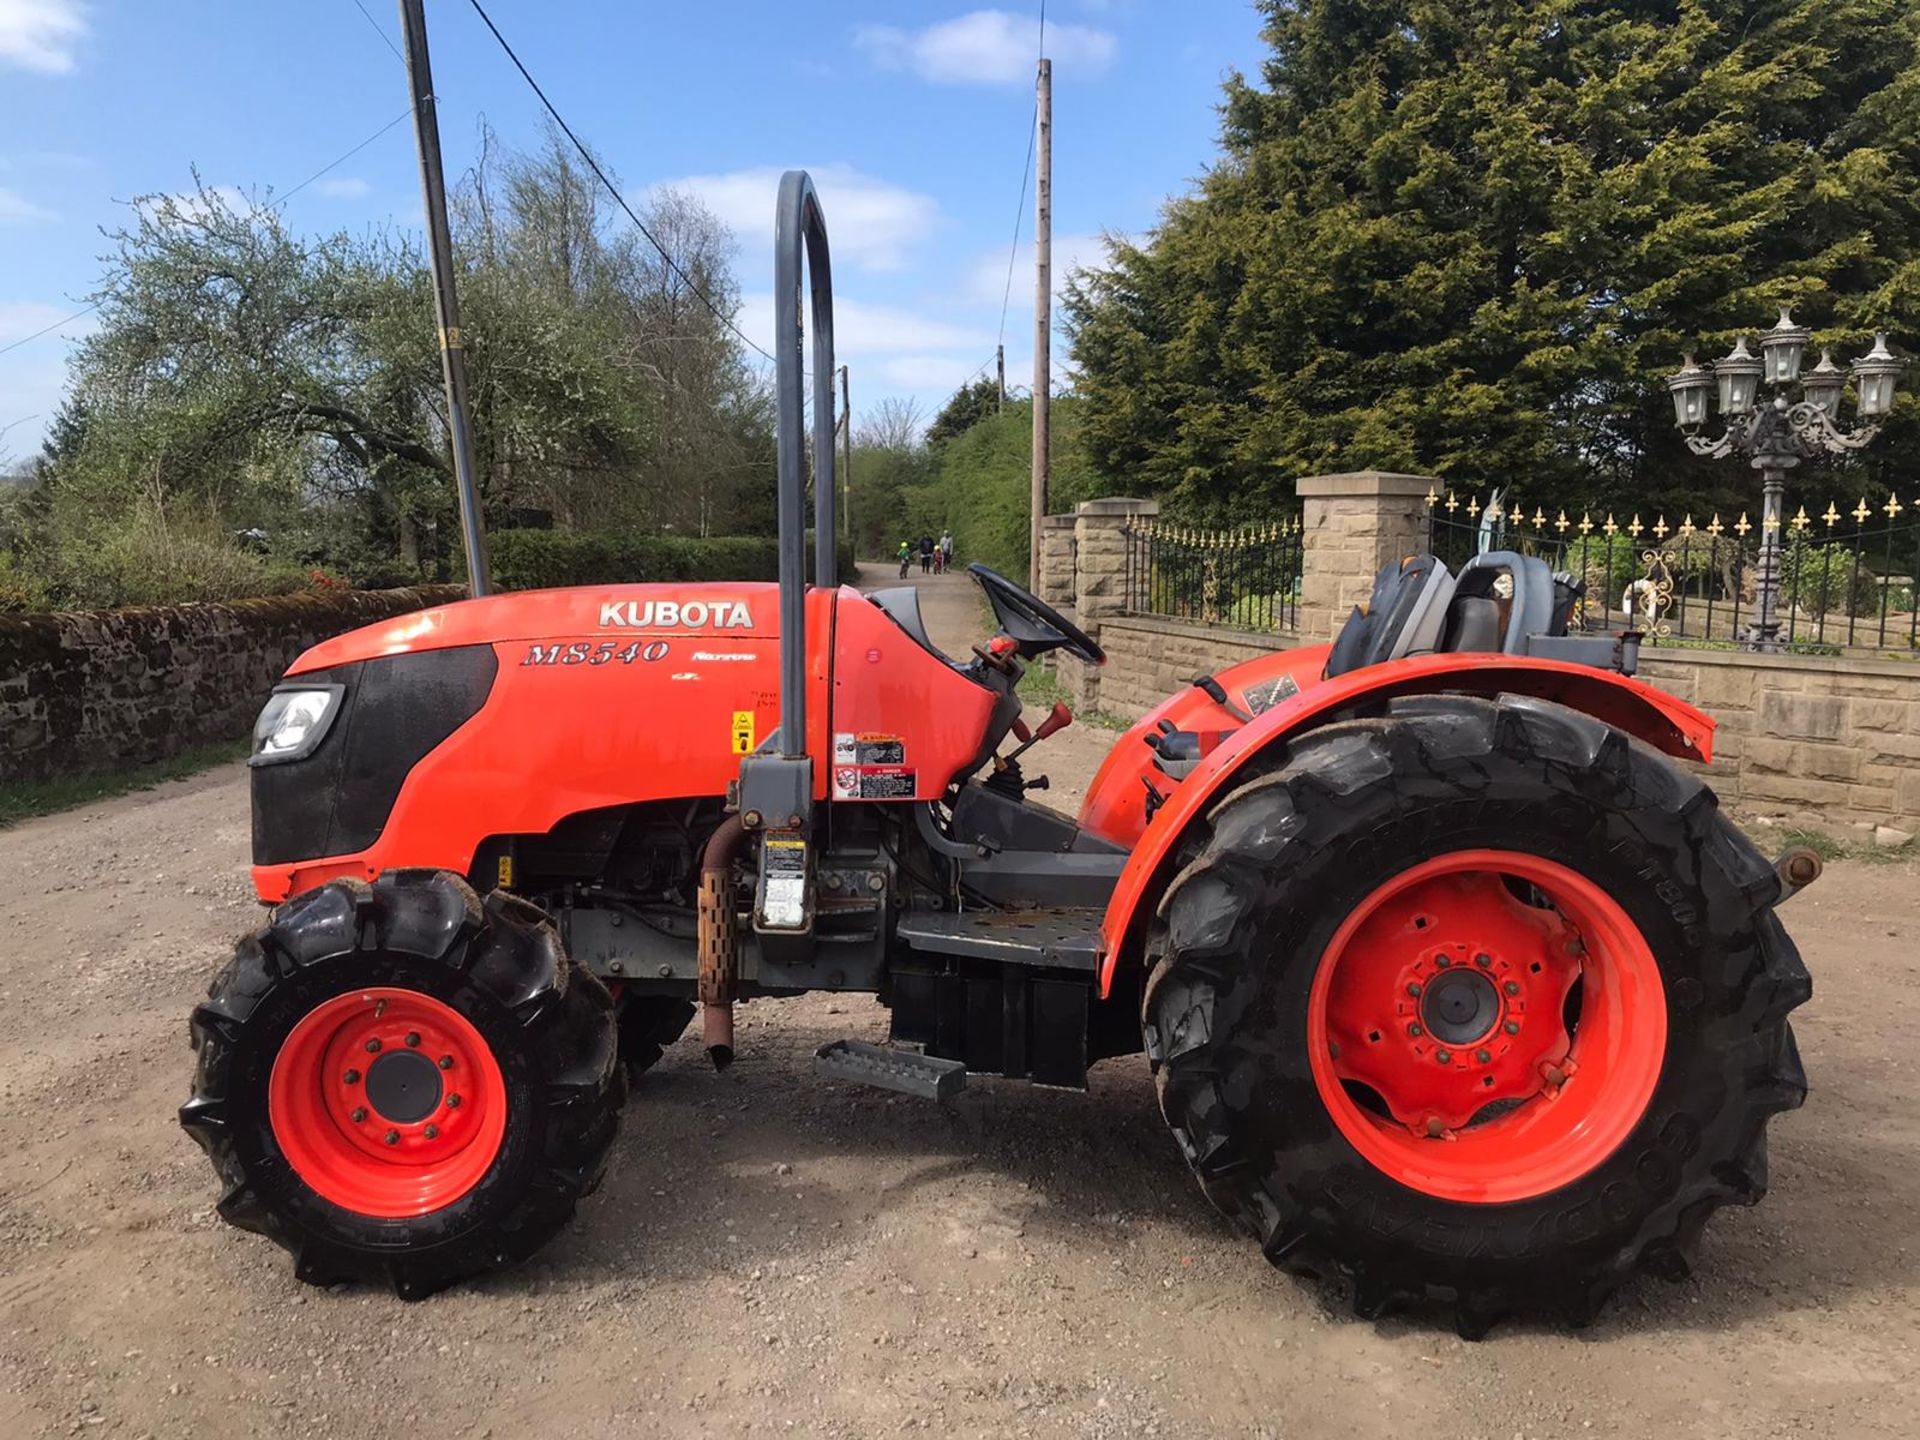 KUBOTA M8540 NARROW TRACTOR APPROX 85 HORSEPOWER RUNS AND DRIVES, 3822 HOURS *PLUS VAT* - Image 3 of 6